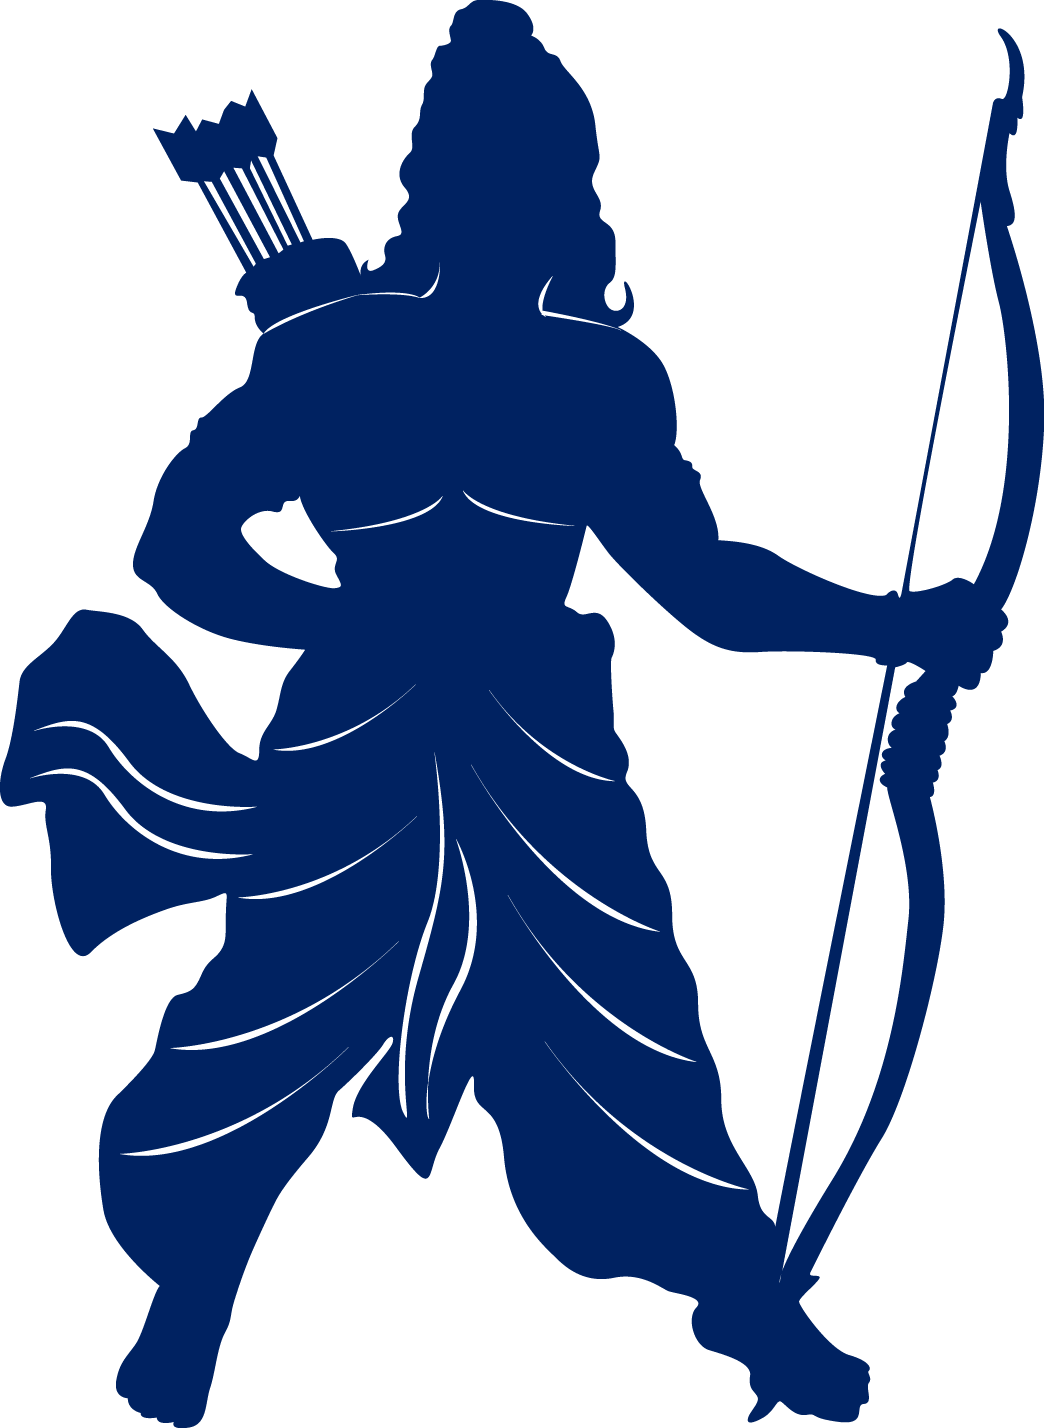 Silhouette at getdrawings com. God clipart lord shiva